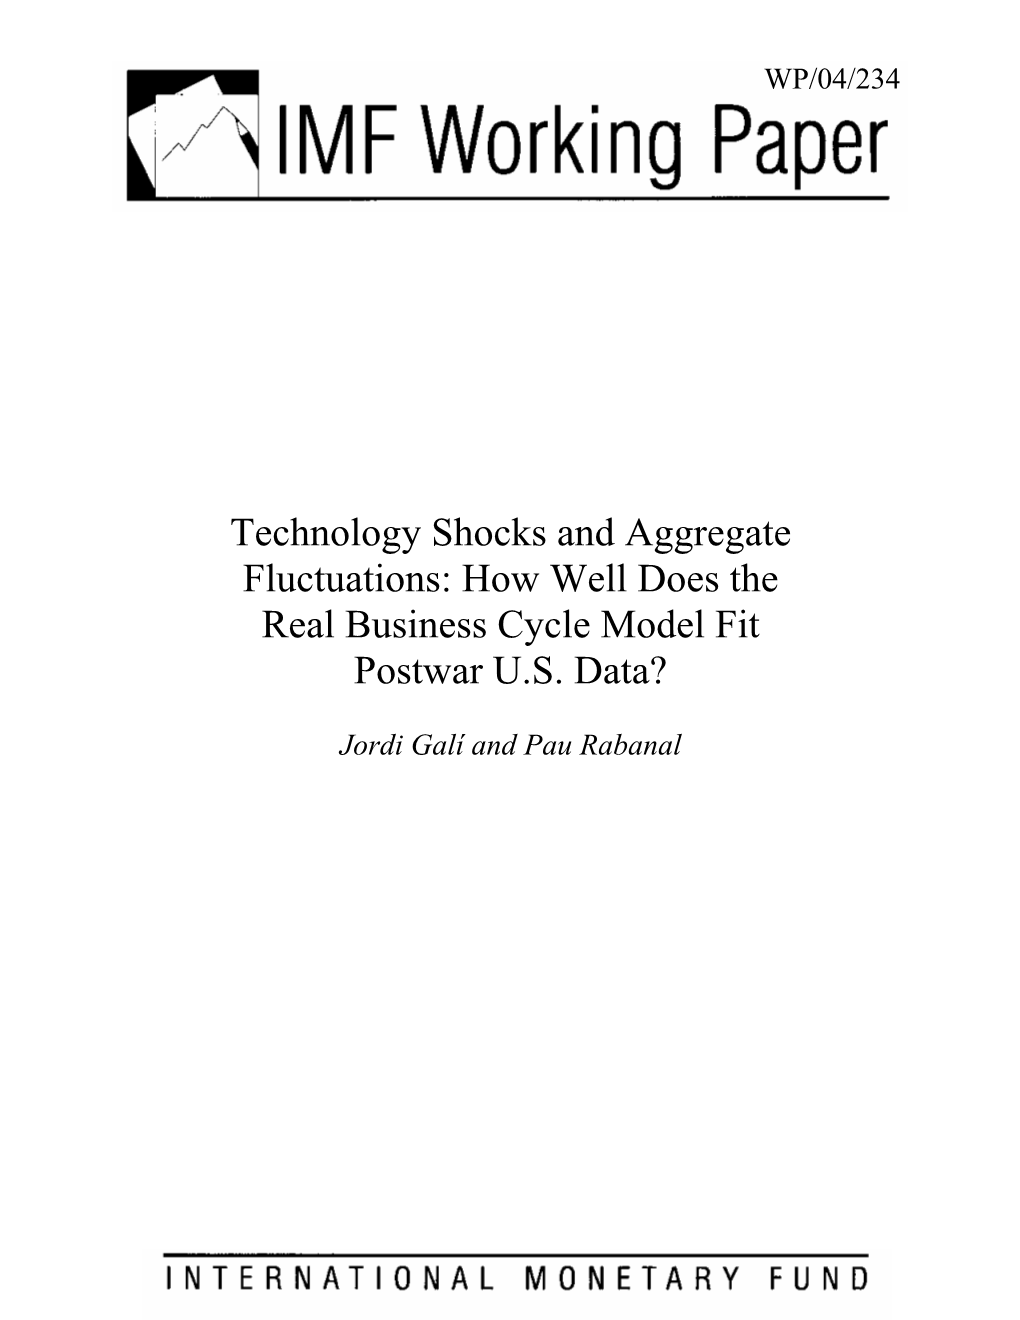 Technology Shocks and Aggregate Fluctuations: How Well Does the Real Business Cycle Model Fit Postwar U.S. Data?